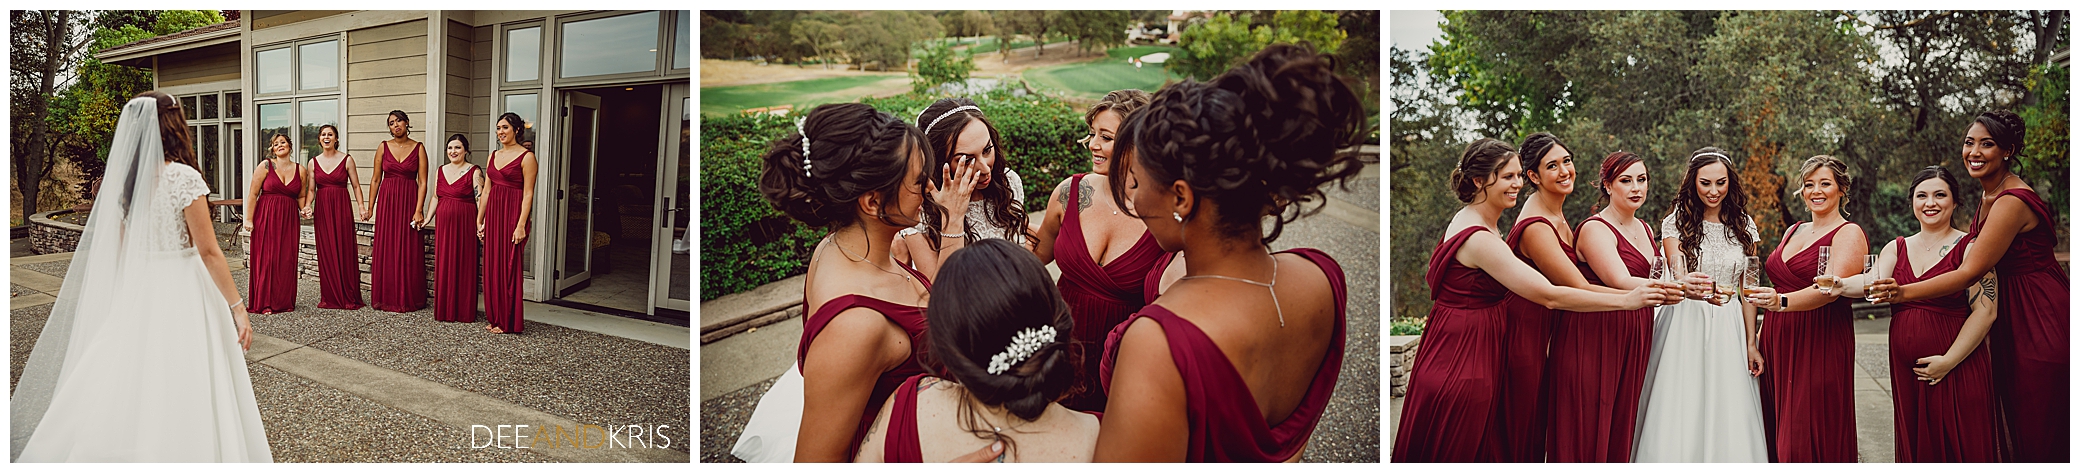 Bride does first look with bridal party at Roseville's garden venue at Catta Verdera Country Club